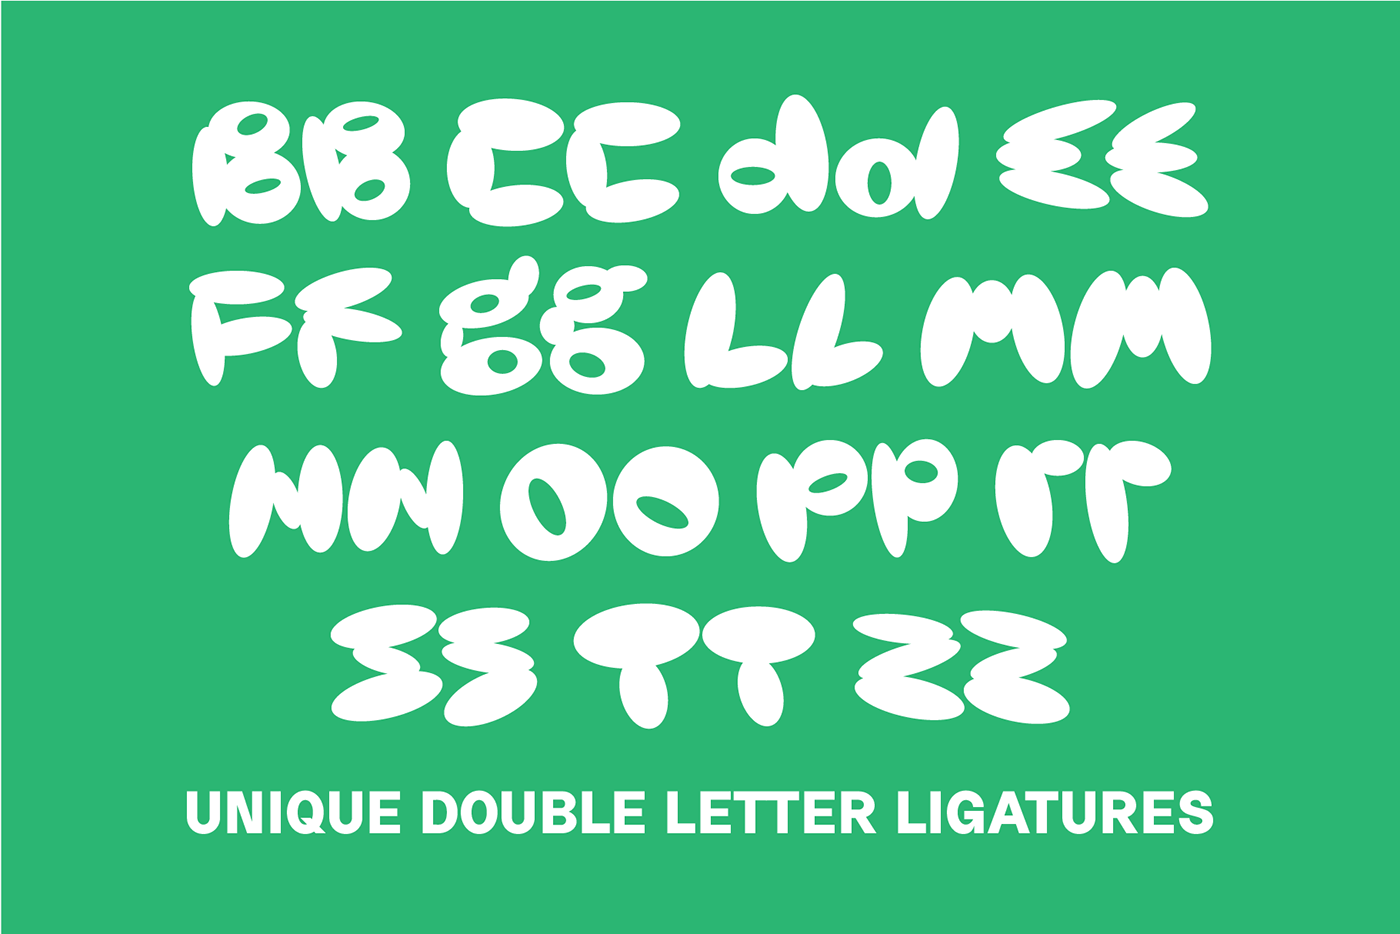 double letter pairs for Orvil font on a green background